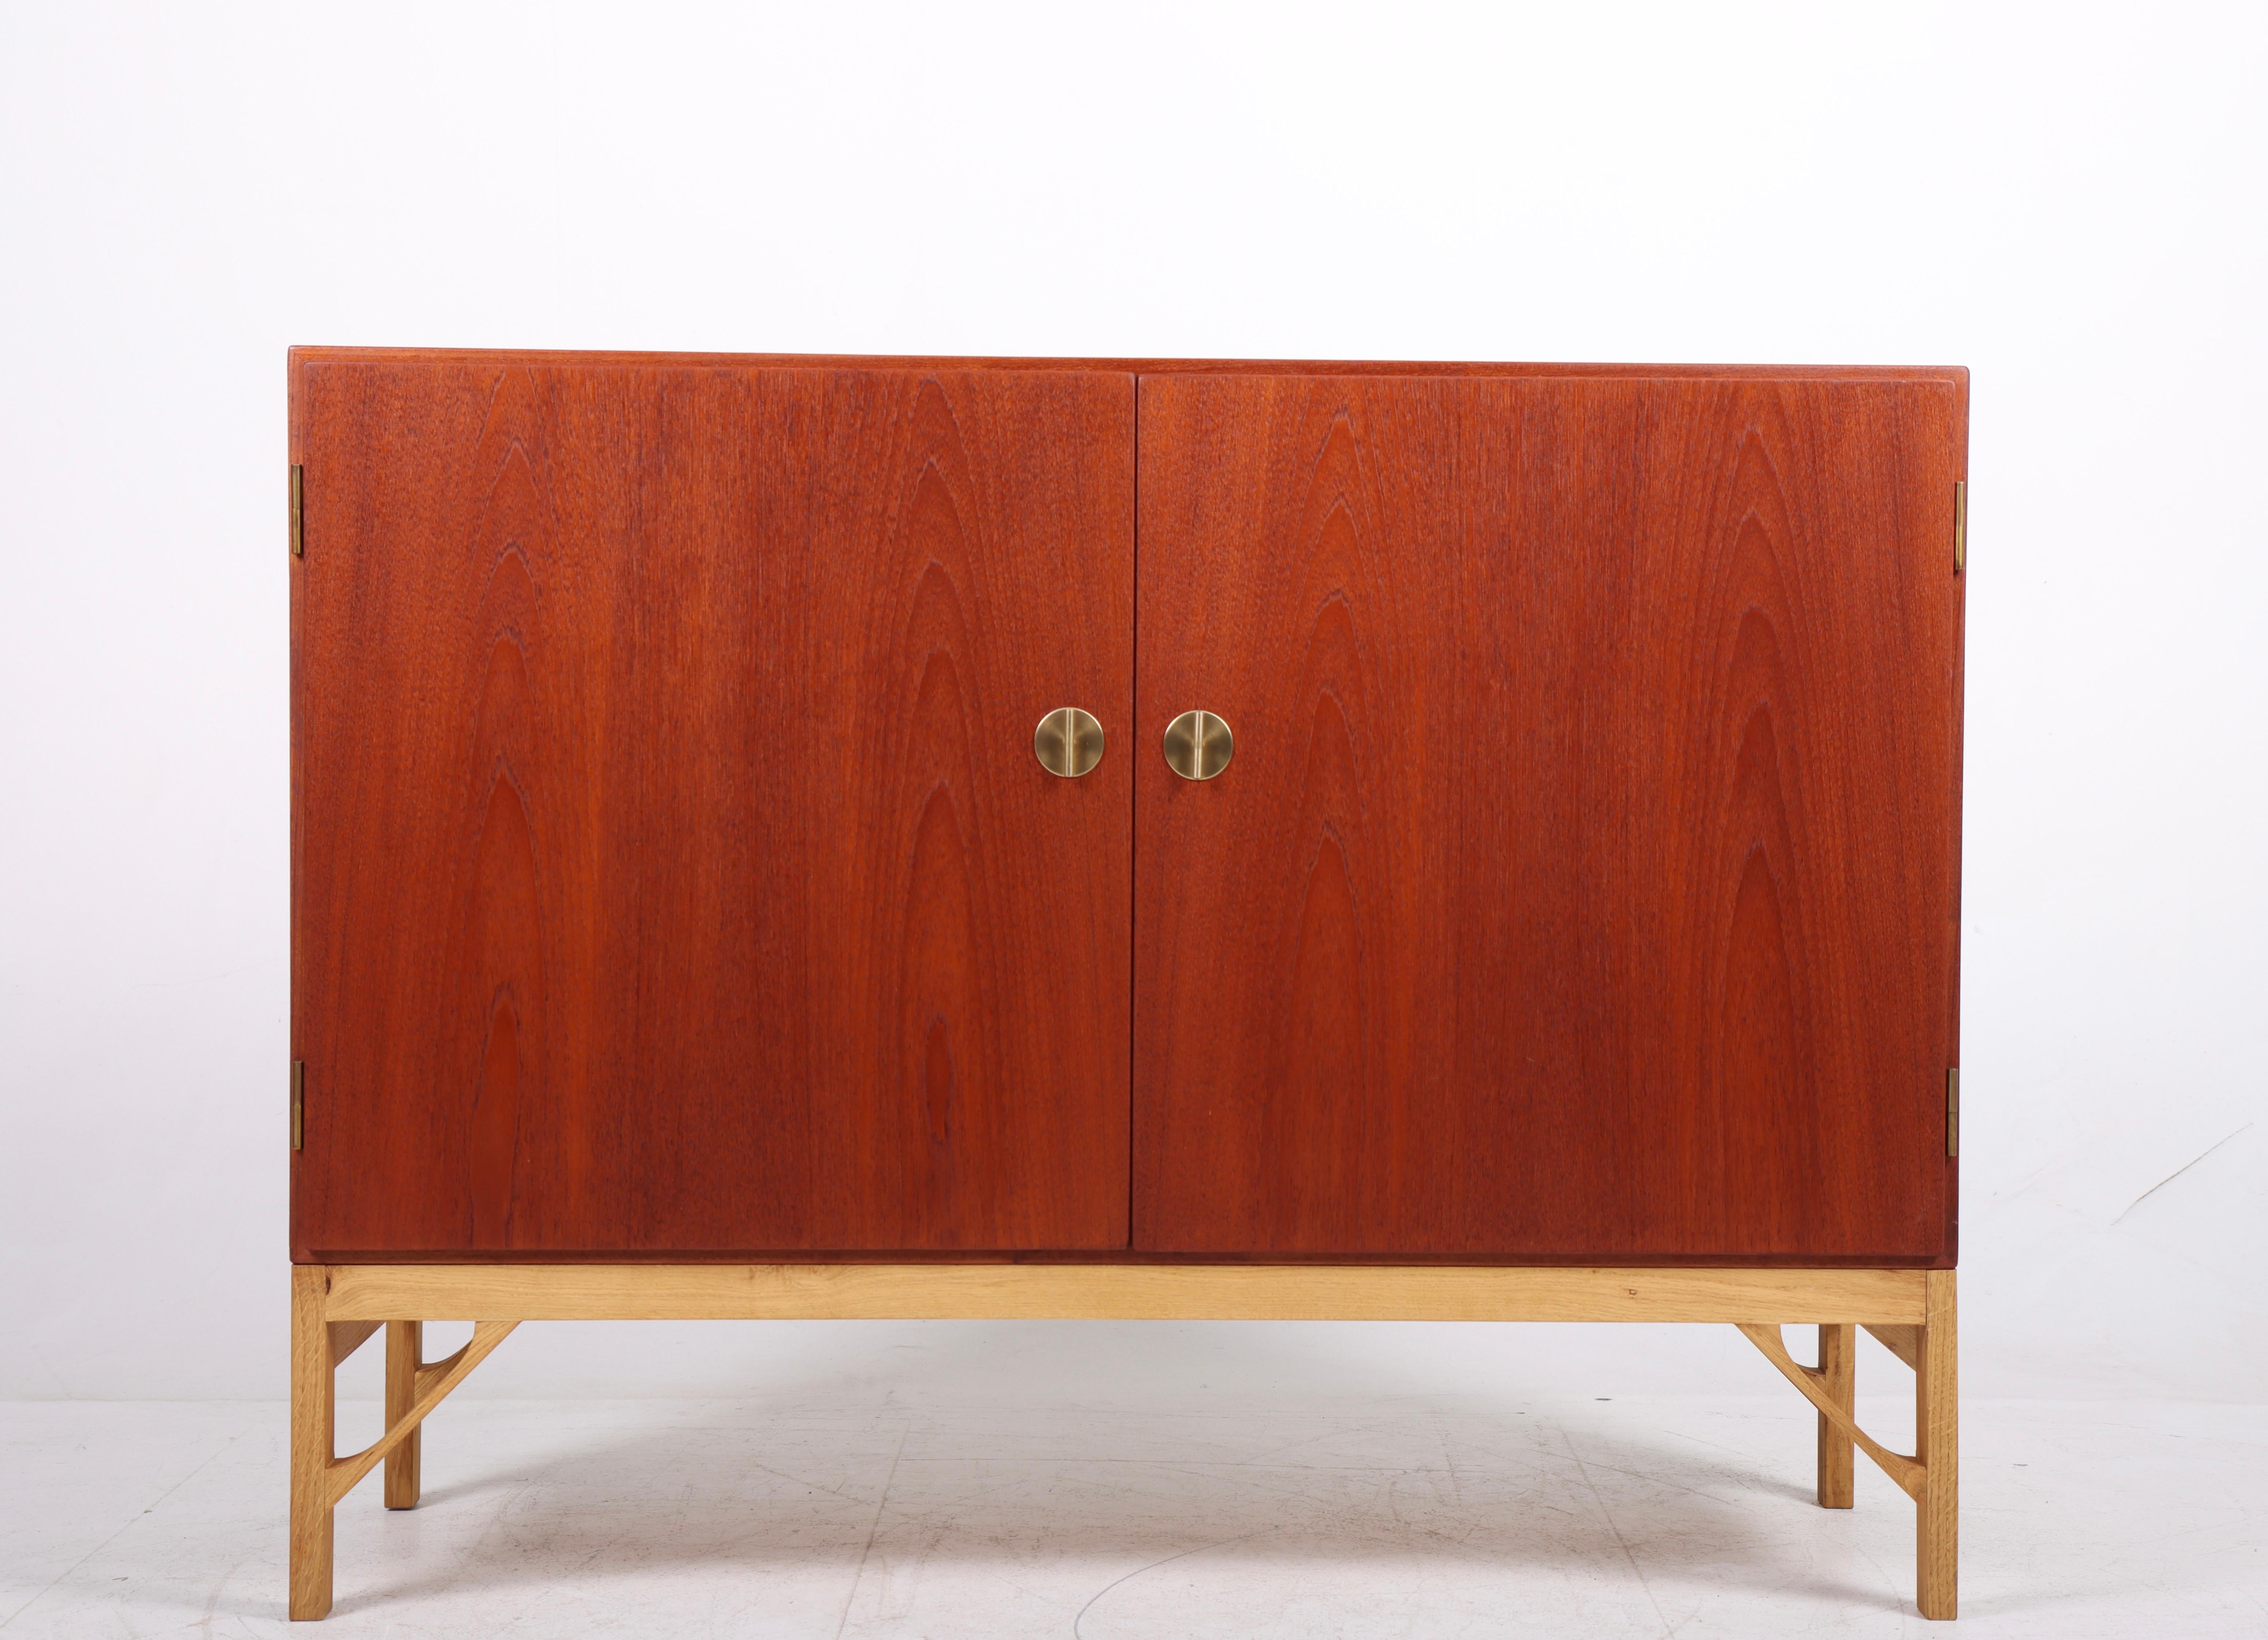 China cabinet in teak and oak with stunning brass hardware and maple Interior. Designed by MAA. Børge Mogensen in 1958, this piece is made by CM Madsen cabinetmakers Denmark in the 1960s. Great original condition.